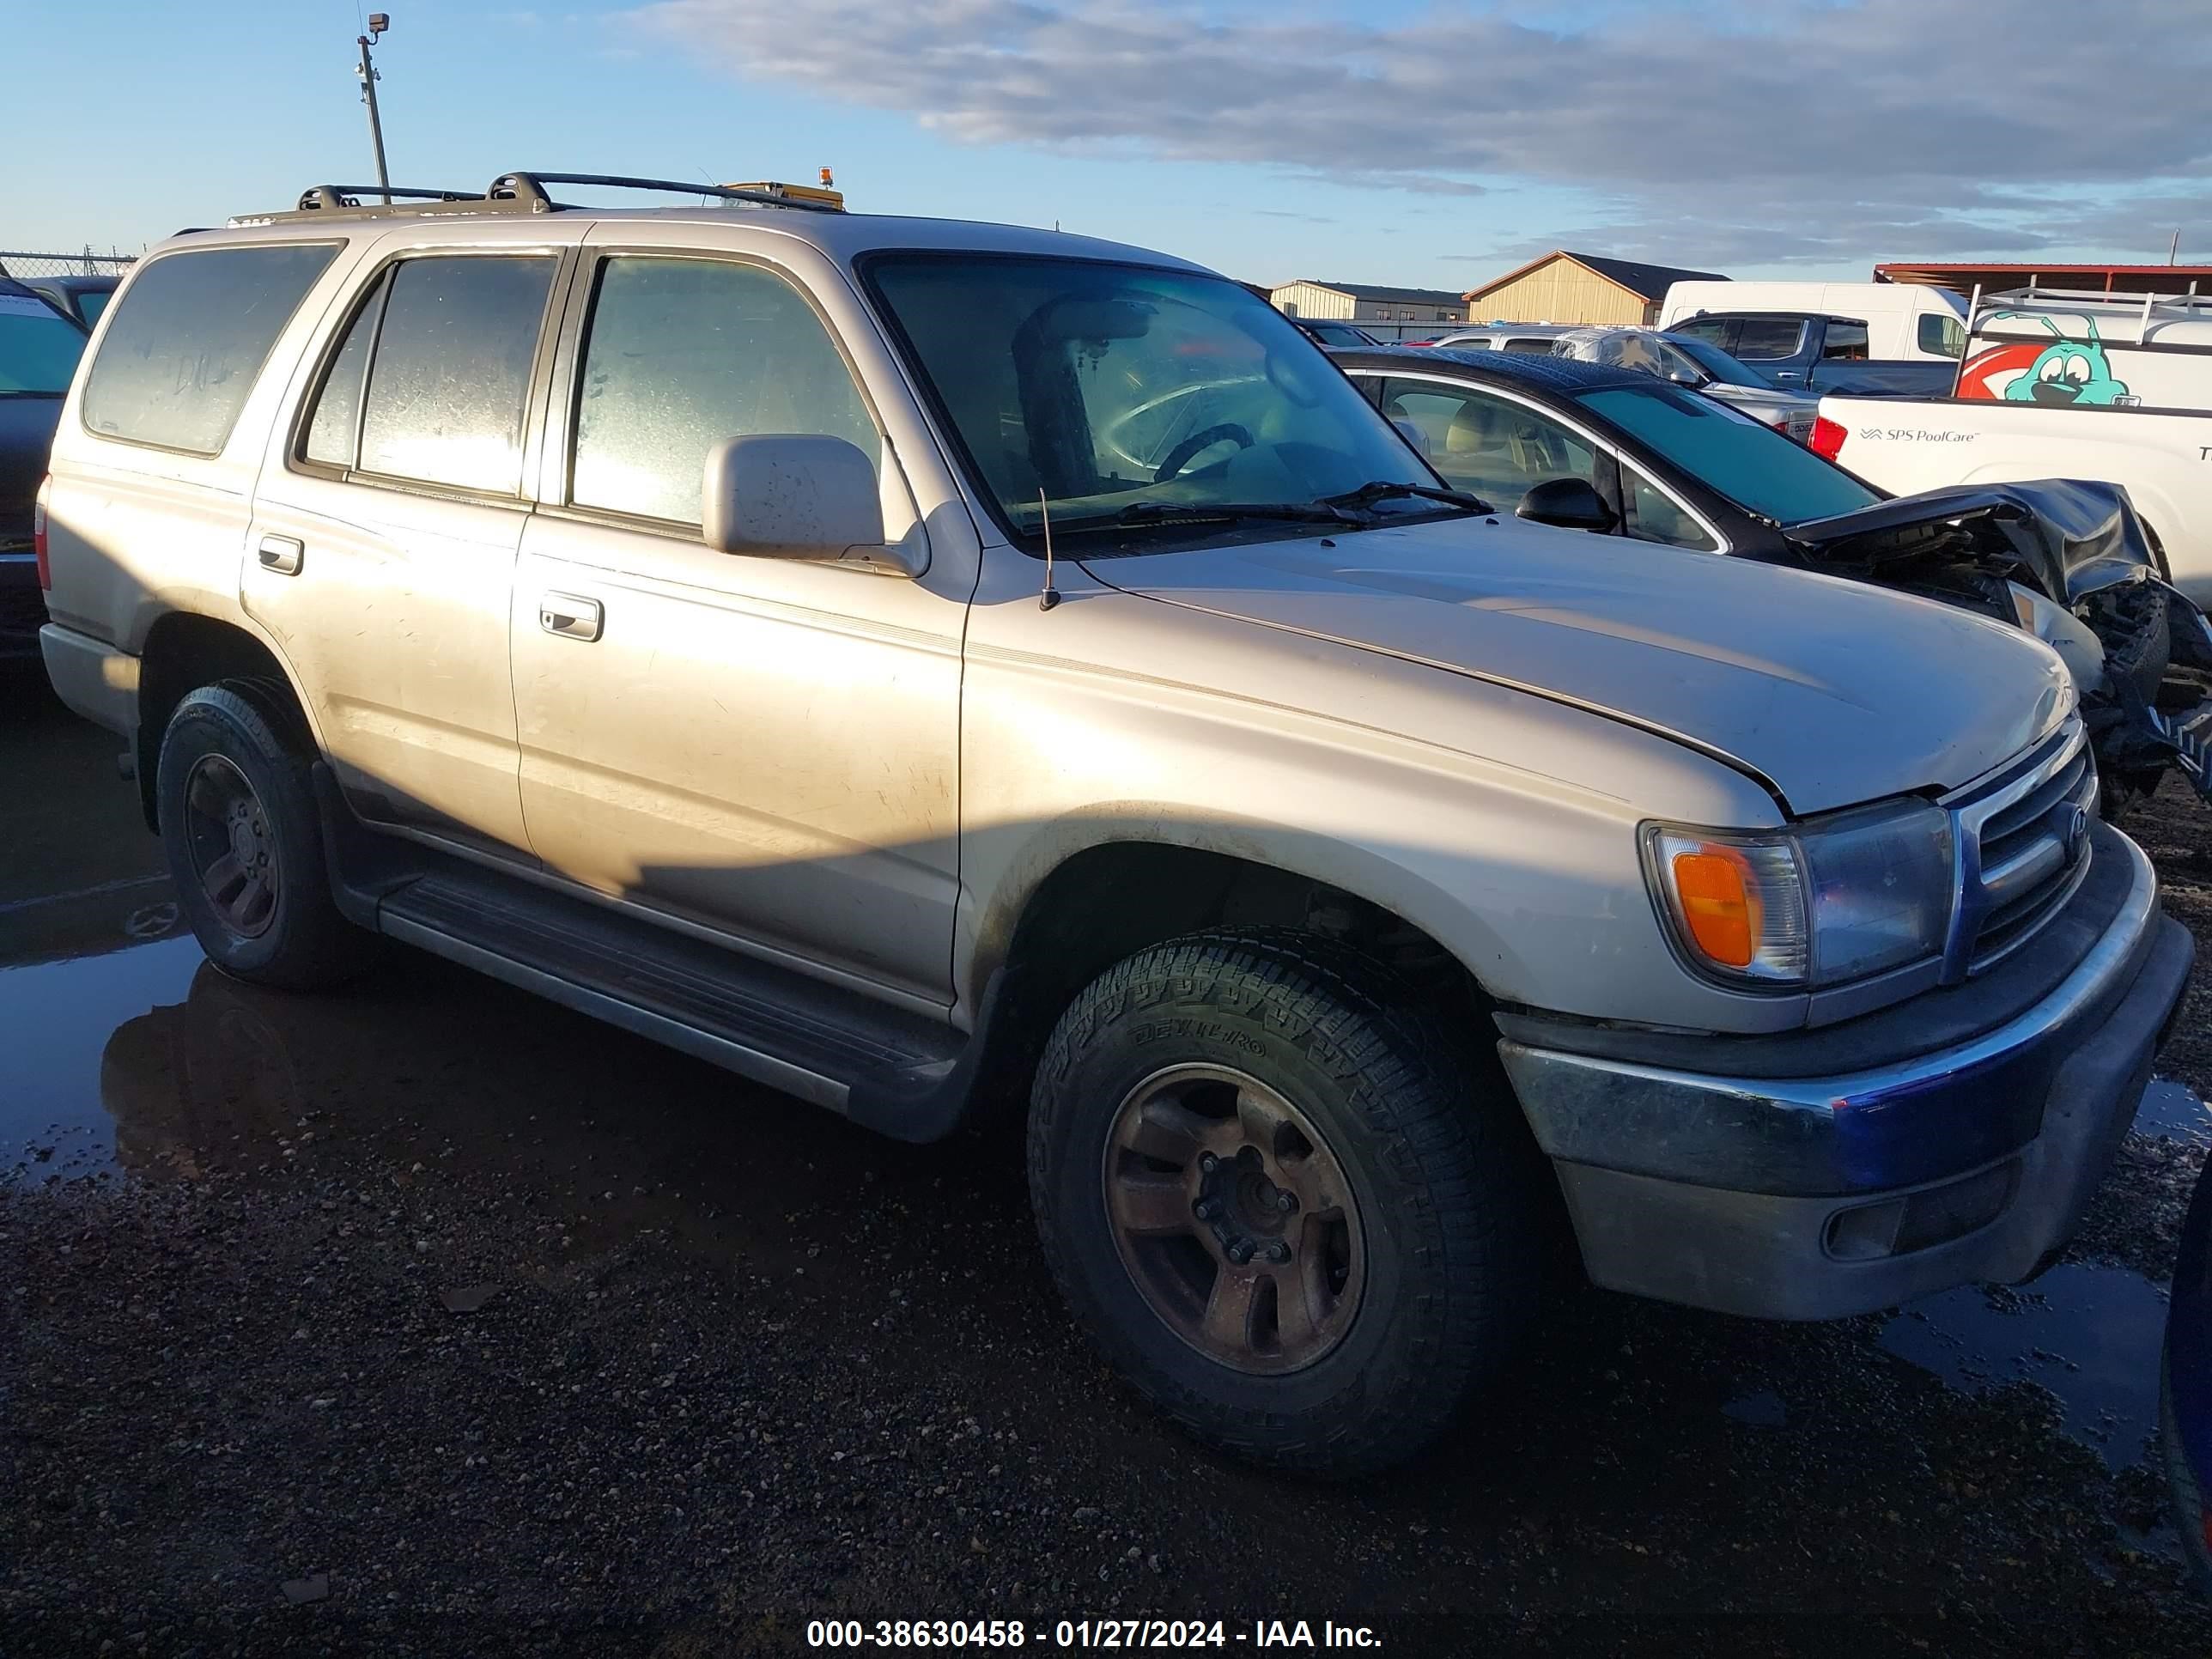 vin: JT3GN86R6X0108397 JT3GN86R6X0108397 1999 toyota 4runner 3400 for Sale in 78616, 2191 Highway 21 West, Dale, USA